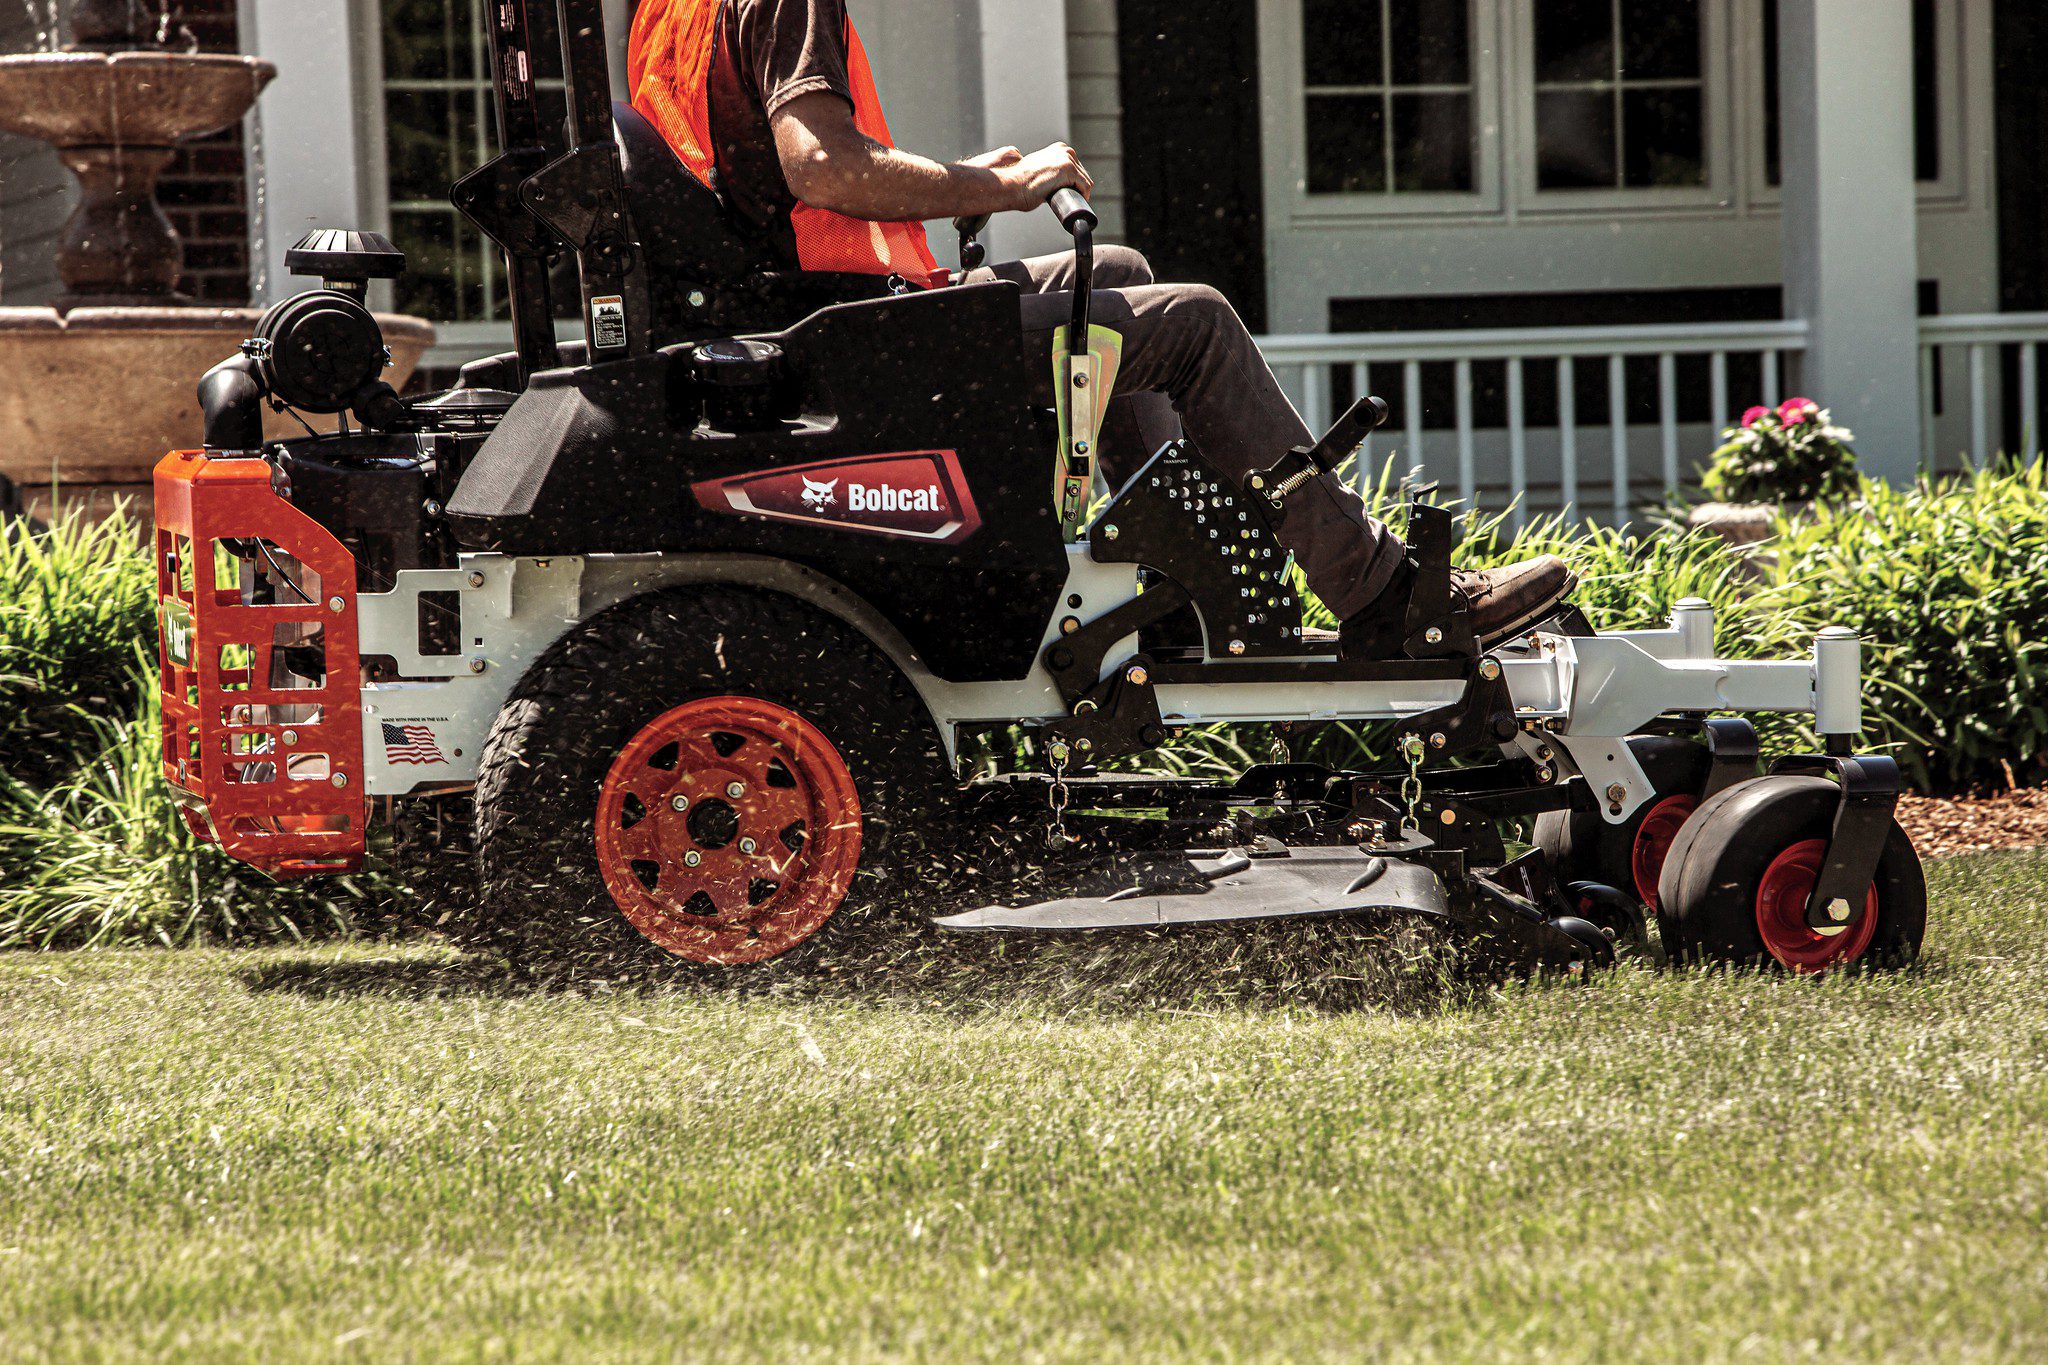 Browse Specs and more for the Bobcat ZT6000 Zero-Turn Mower 52″ - KC Bobcat